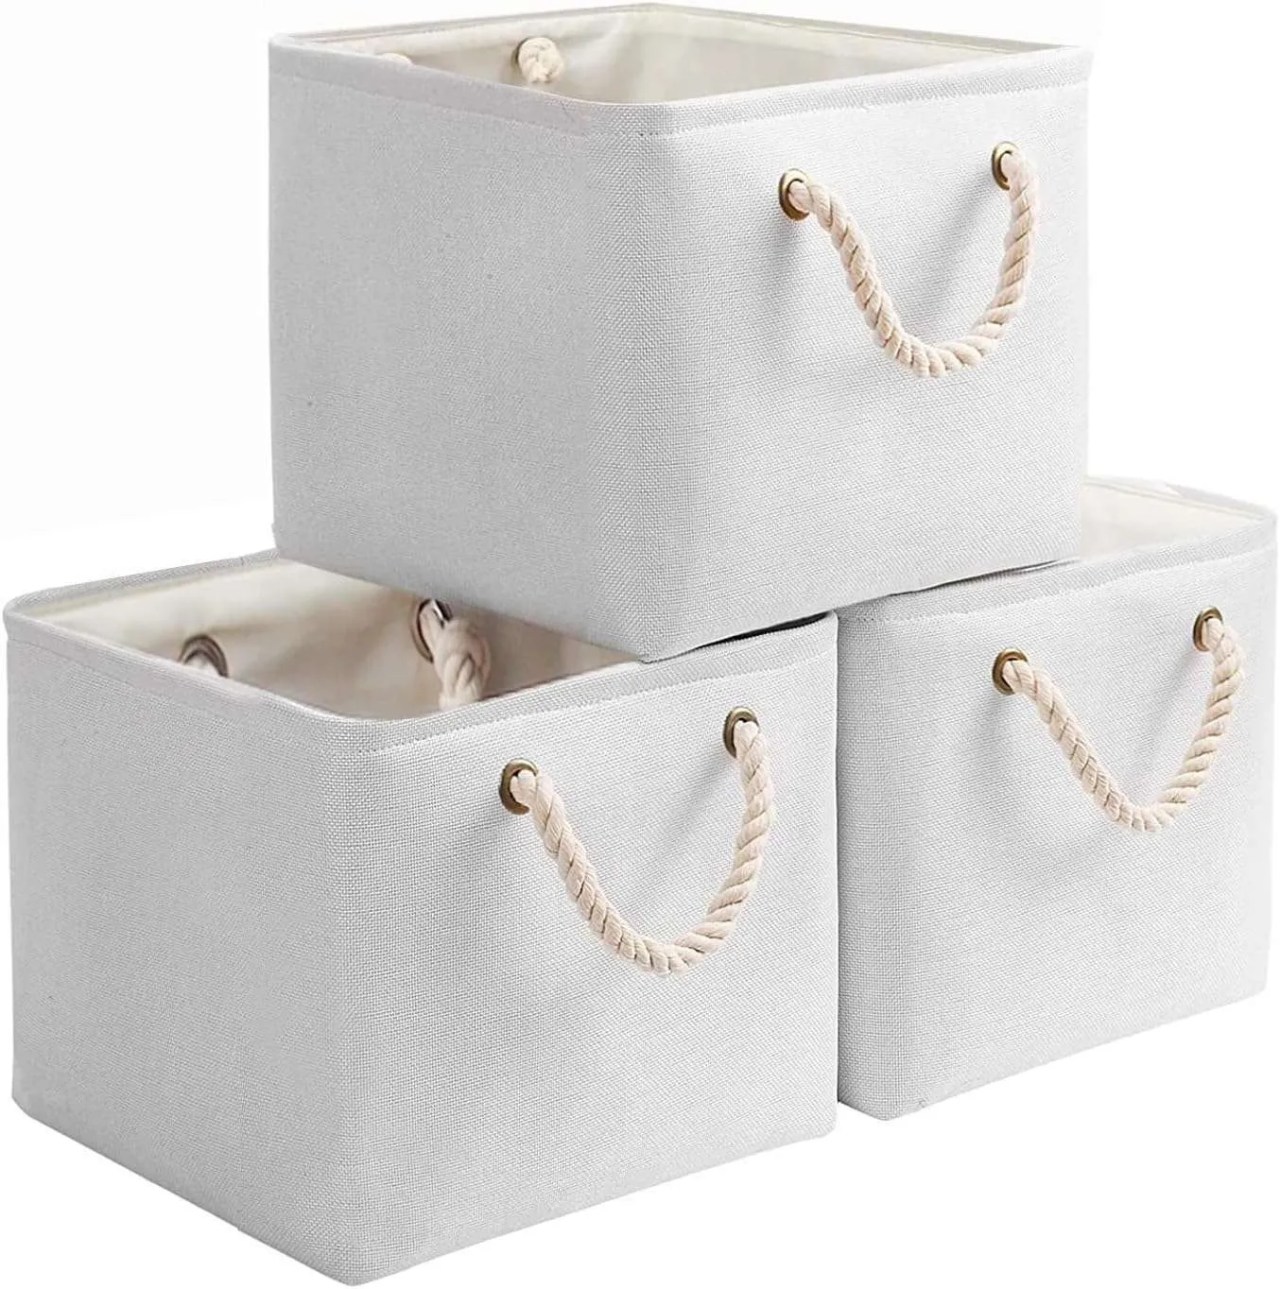 fabric storage baskets with rope handles